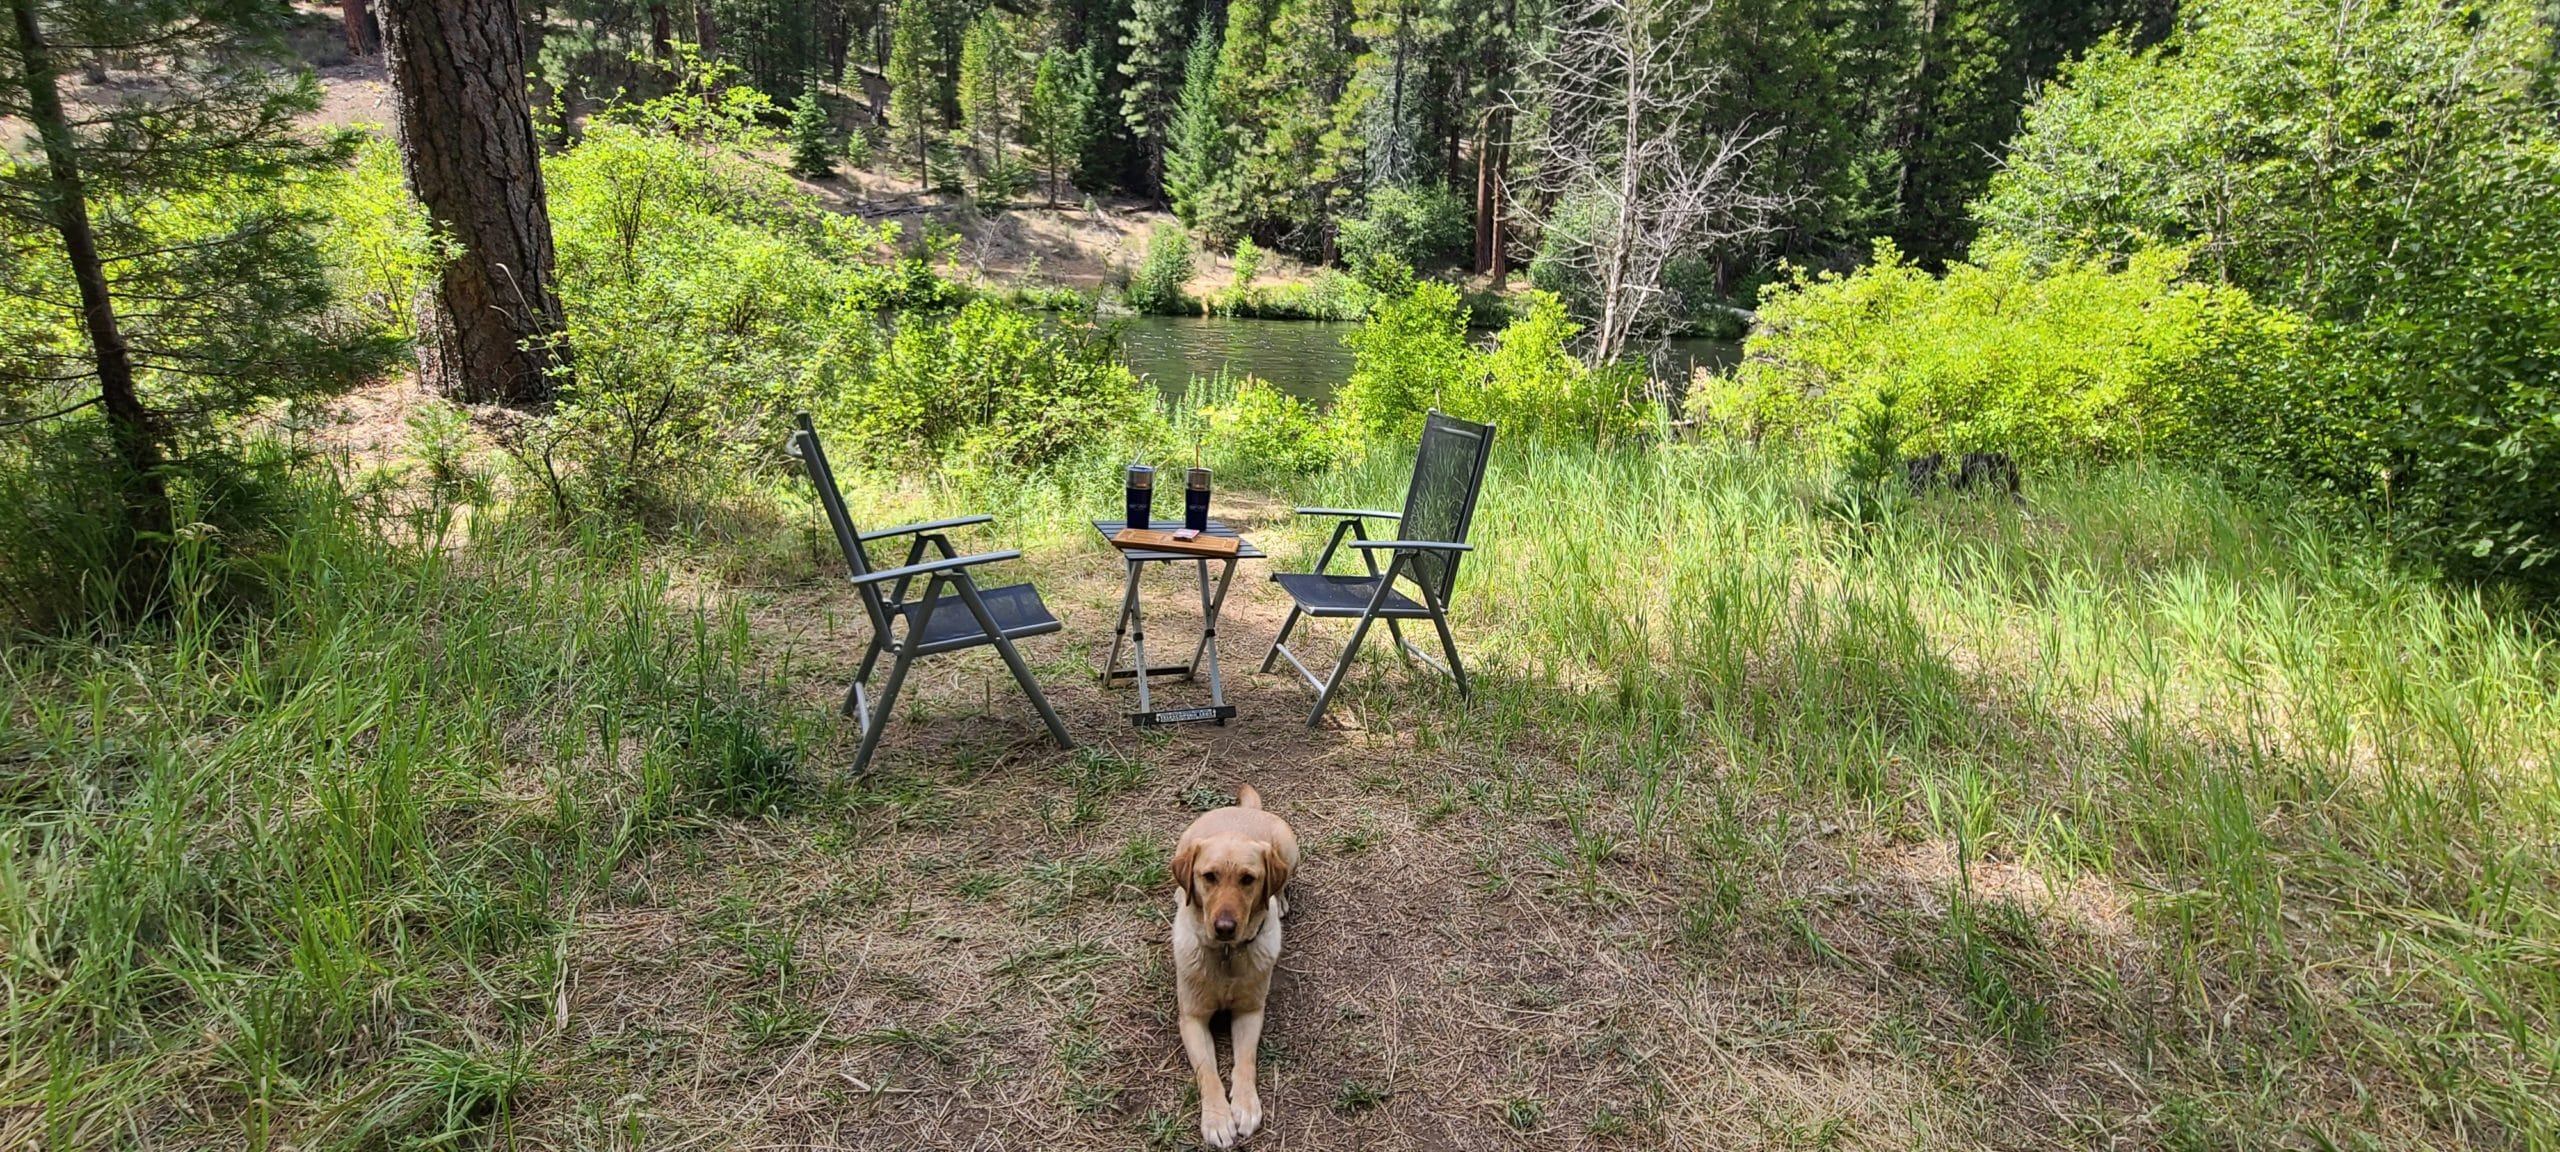 Dog in Front of Camp Chairs and a Table by a River